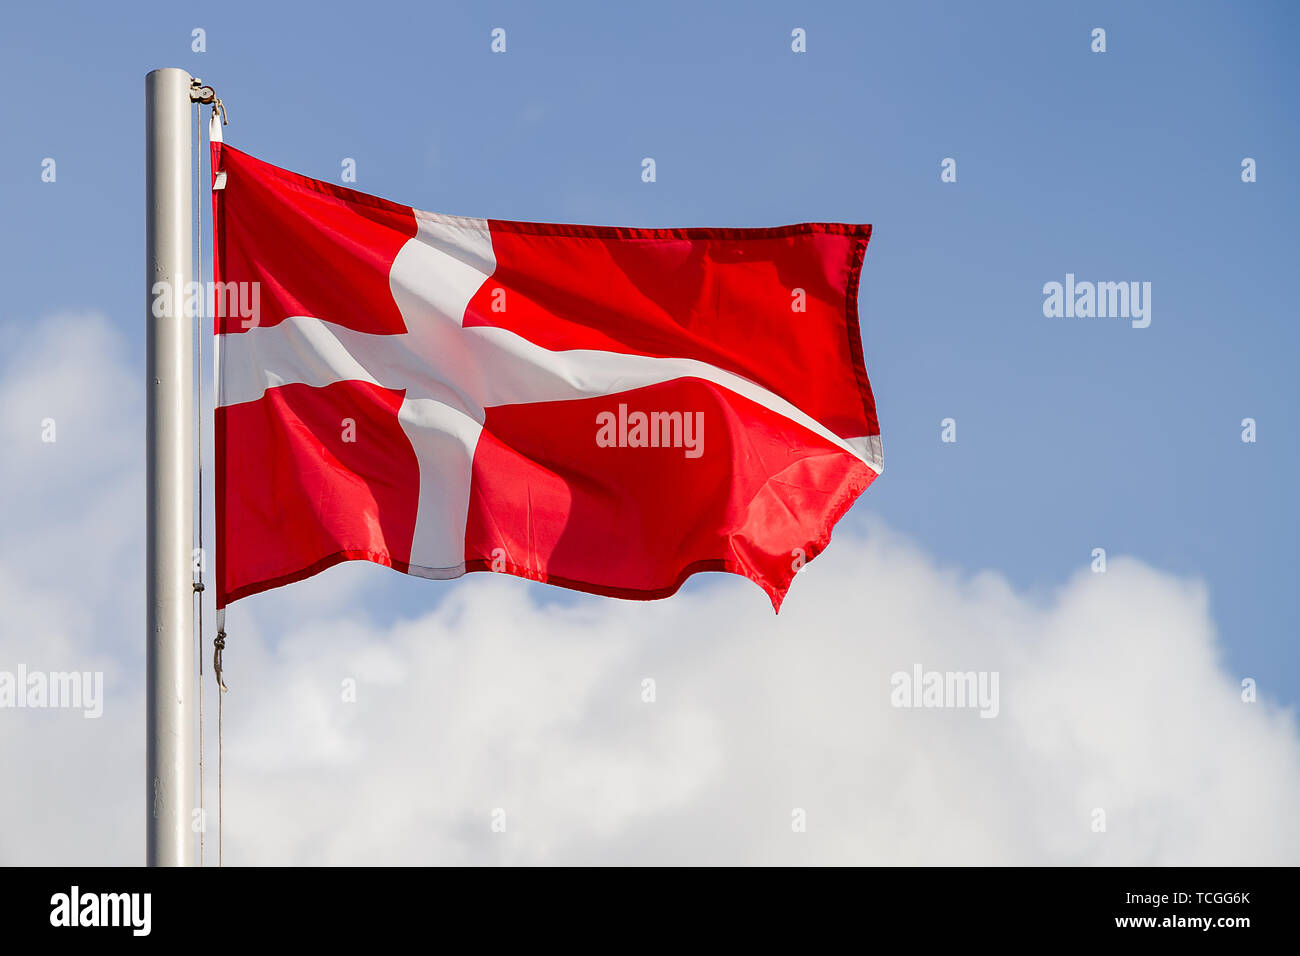 Denmark flag is waving in front of blue sky Stock Photo